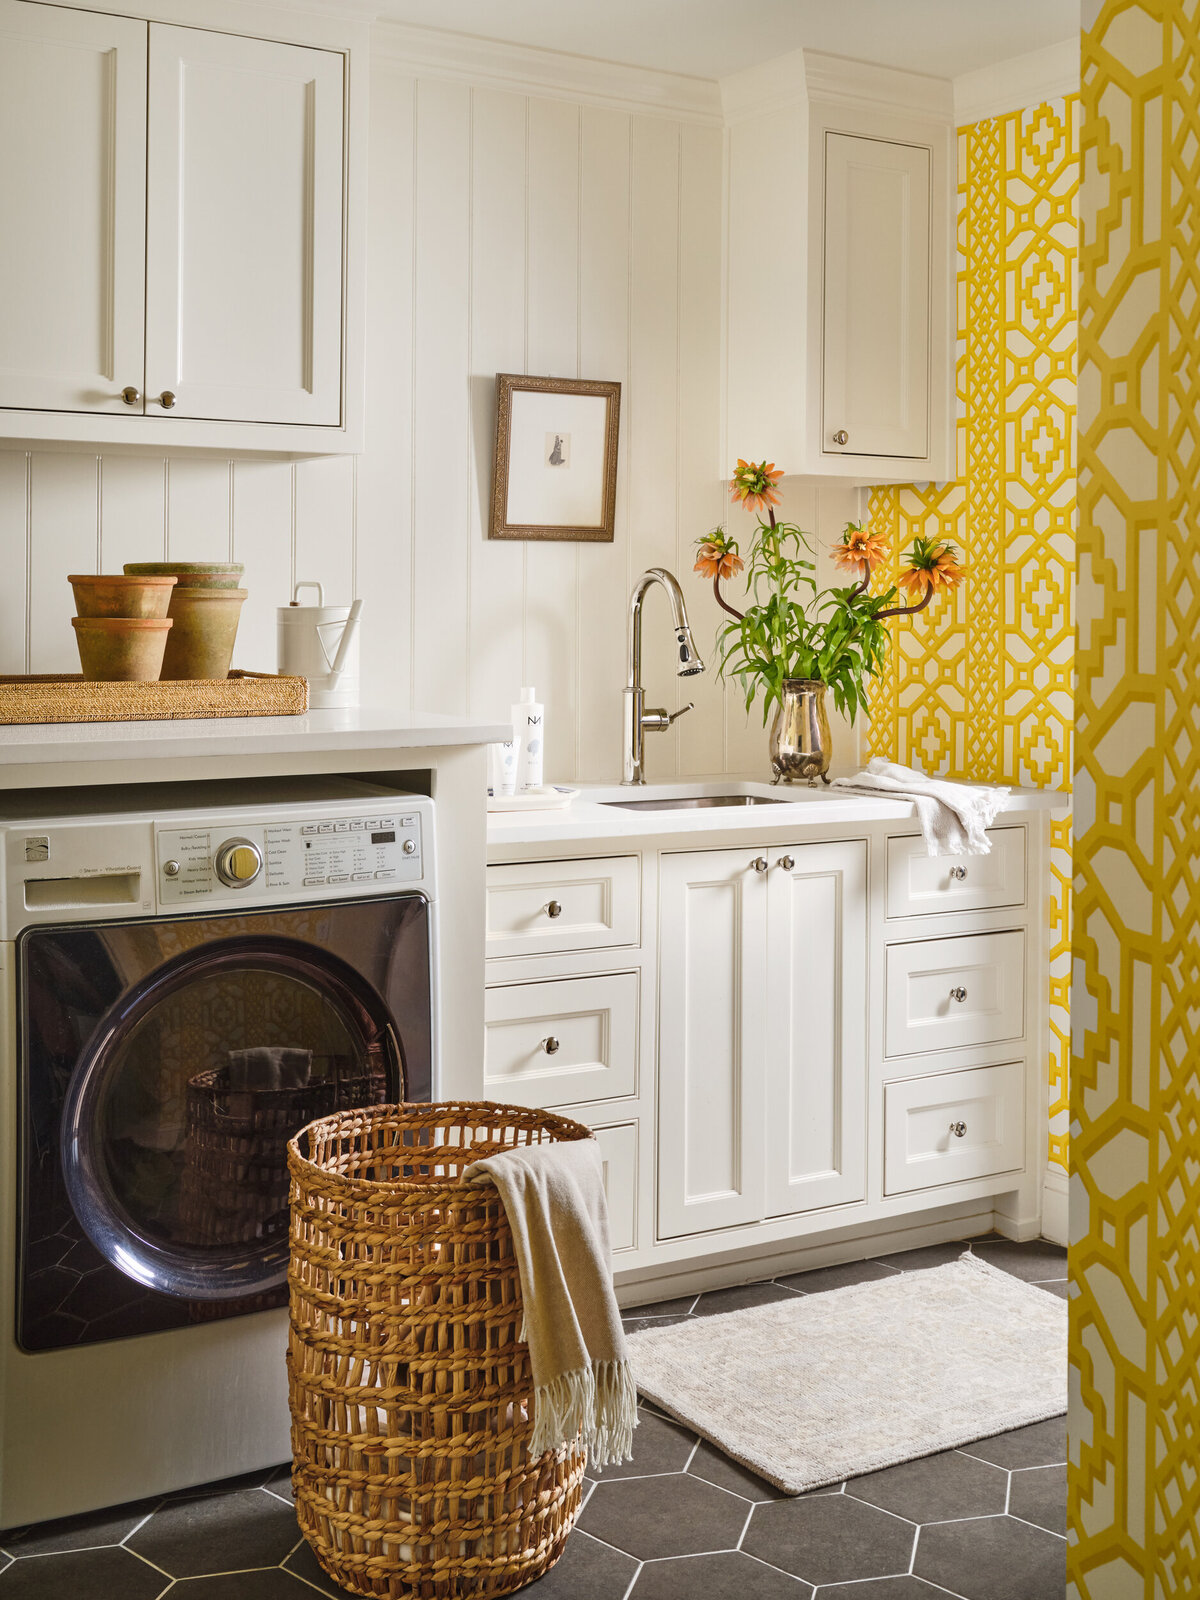 Cream and Yellow Wallpaper in Laundry Room